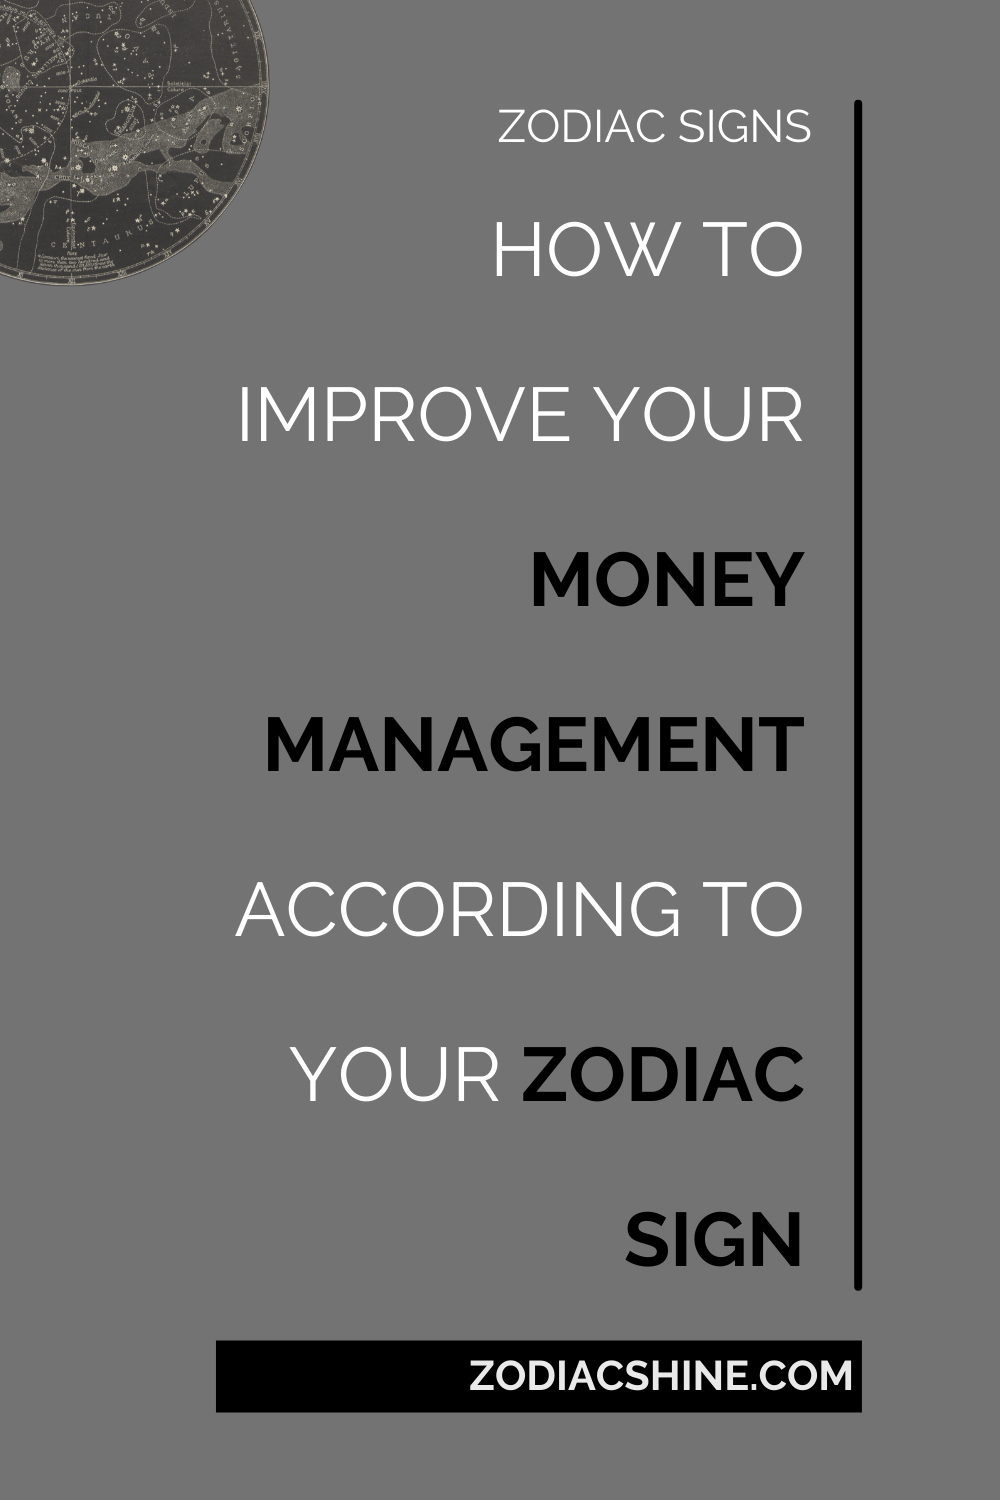 HOW TO IMPROVE YOUR MONEY MANAGEMENT ACCORDING TO YOUR ZODIAC SIGN